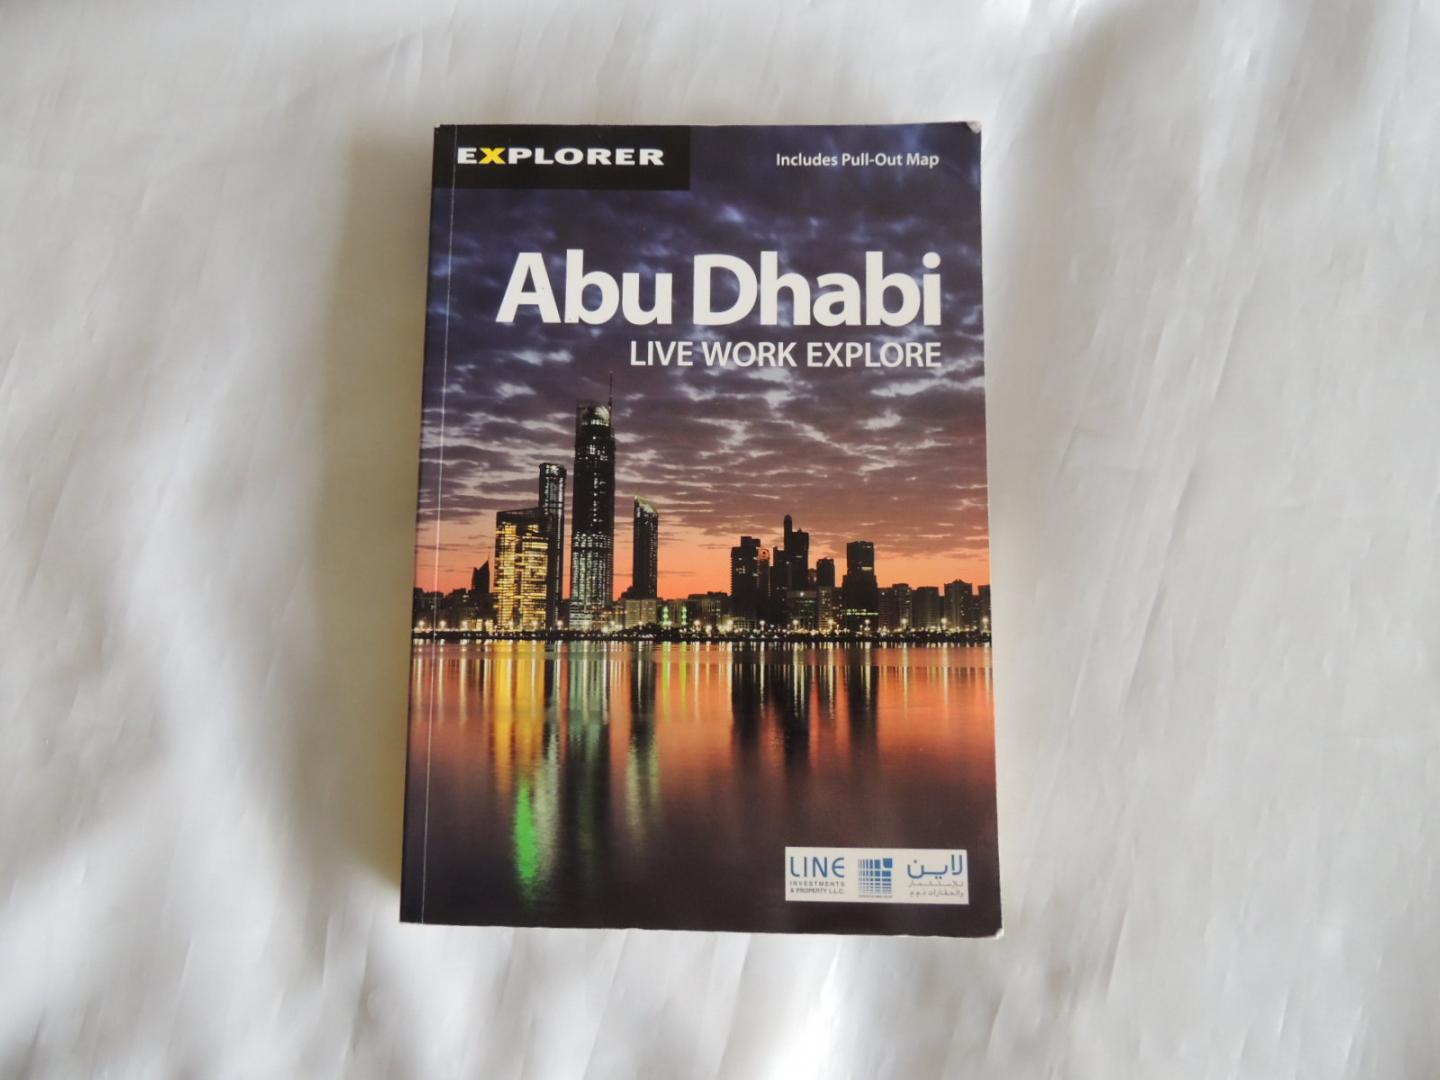  - Abu Dhabi live work explore - includes Pull Out Map